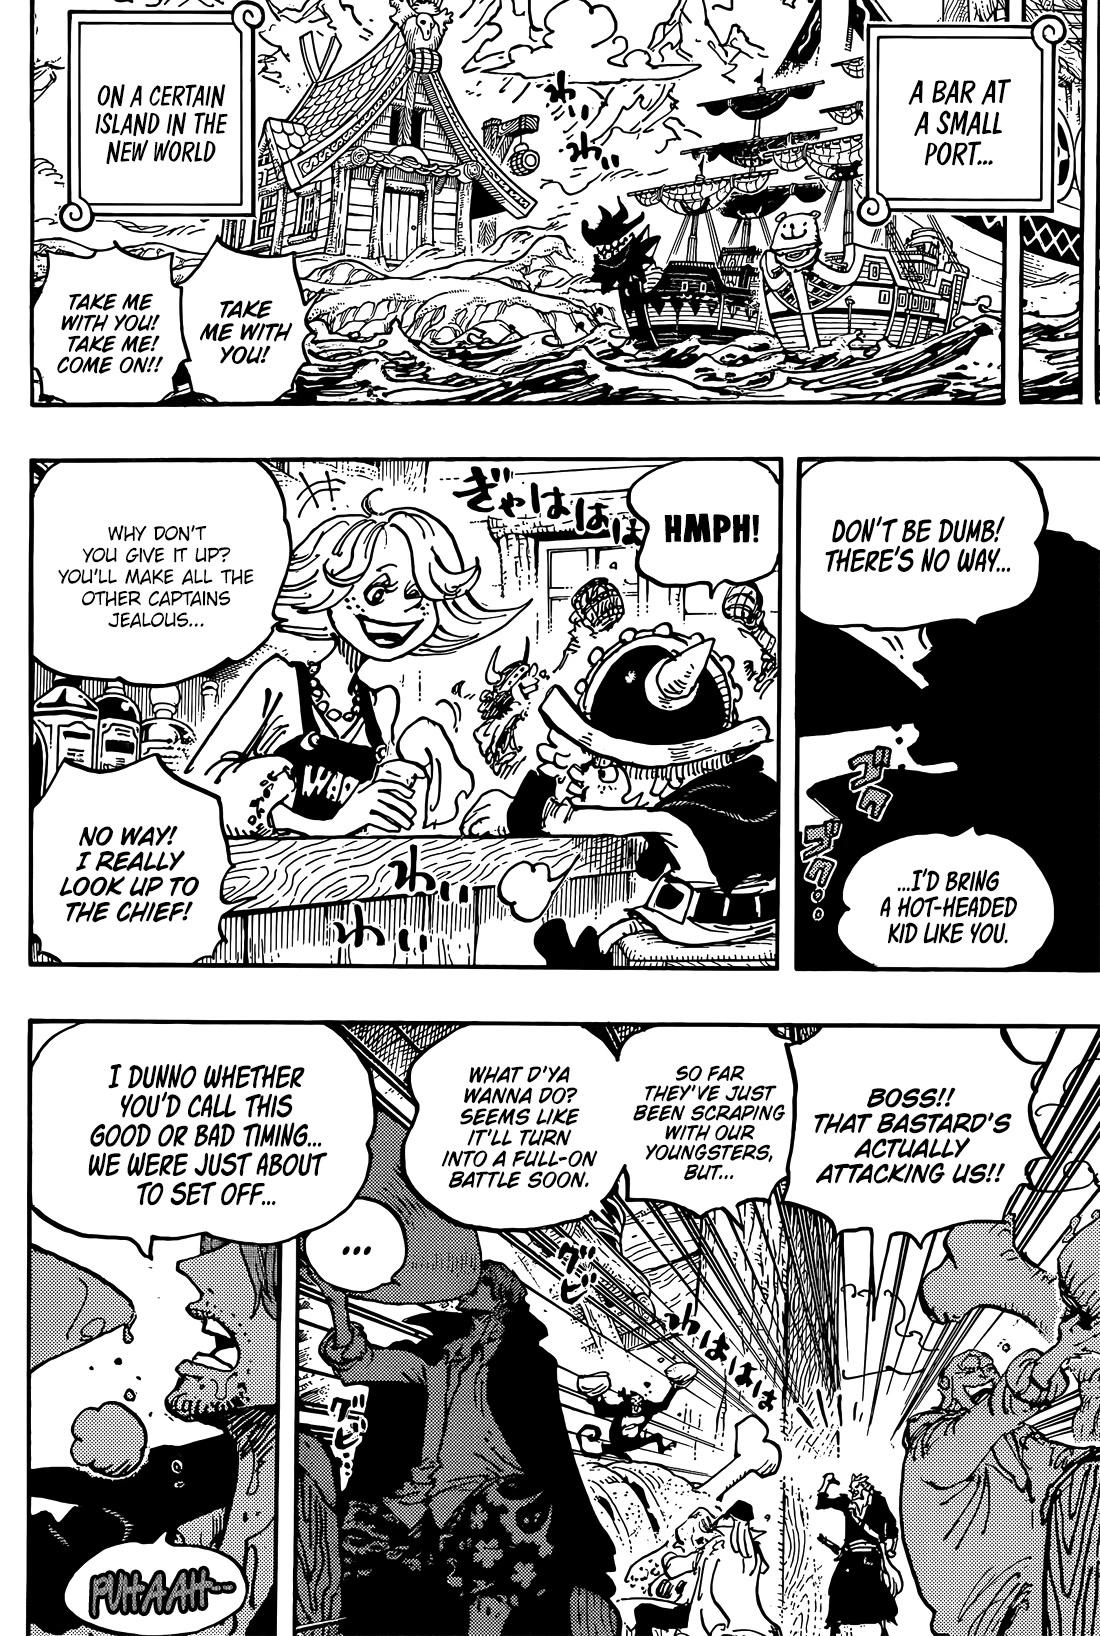 Read One Piece Manga Online Chapters In High Quality